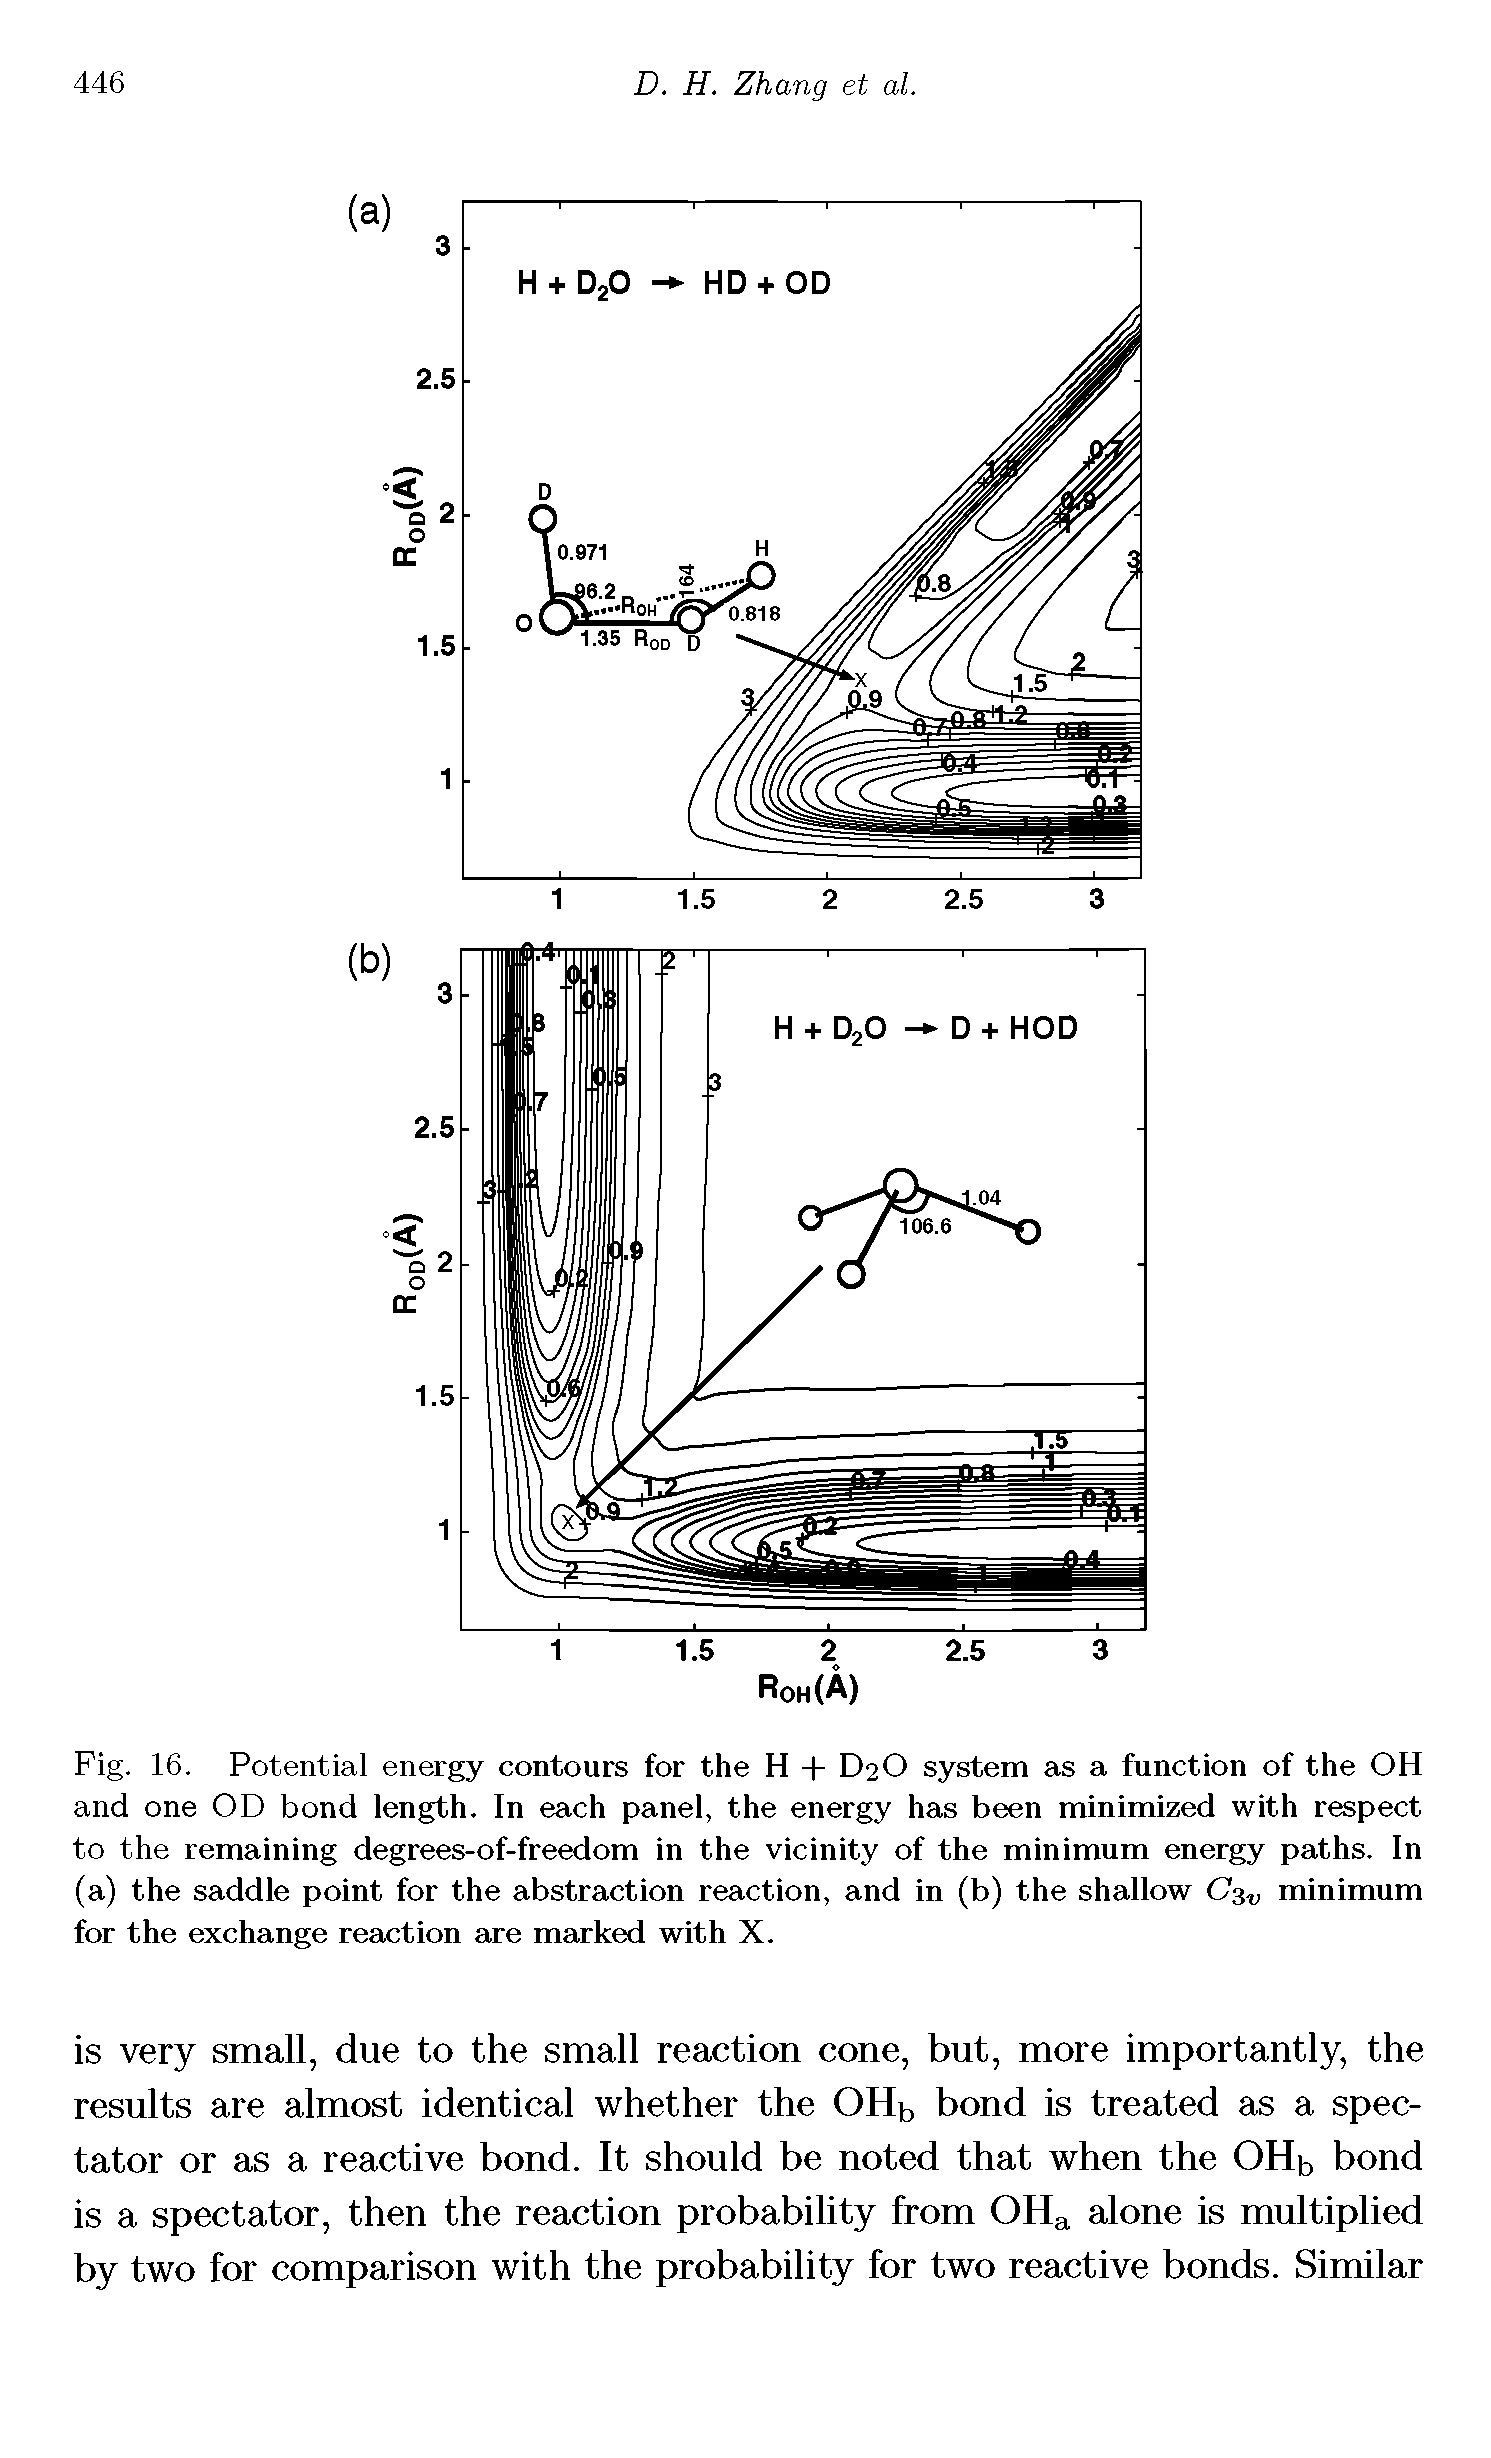 Fig. 16. Potential energy contours for the H + D2O system as a function of the OH and one OD bond length. In each panel, the energy has been minimized with respect to the remaining degrees-of-freedom in the vicinity of the minimum energy paths. In (a) the saddle point for the abstraction reaction, and in (b) the shallow < >, minimum for the exchange reaction are marked with X.